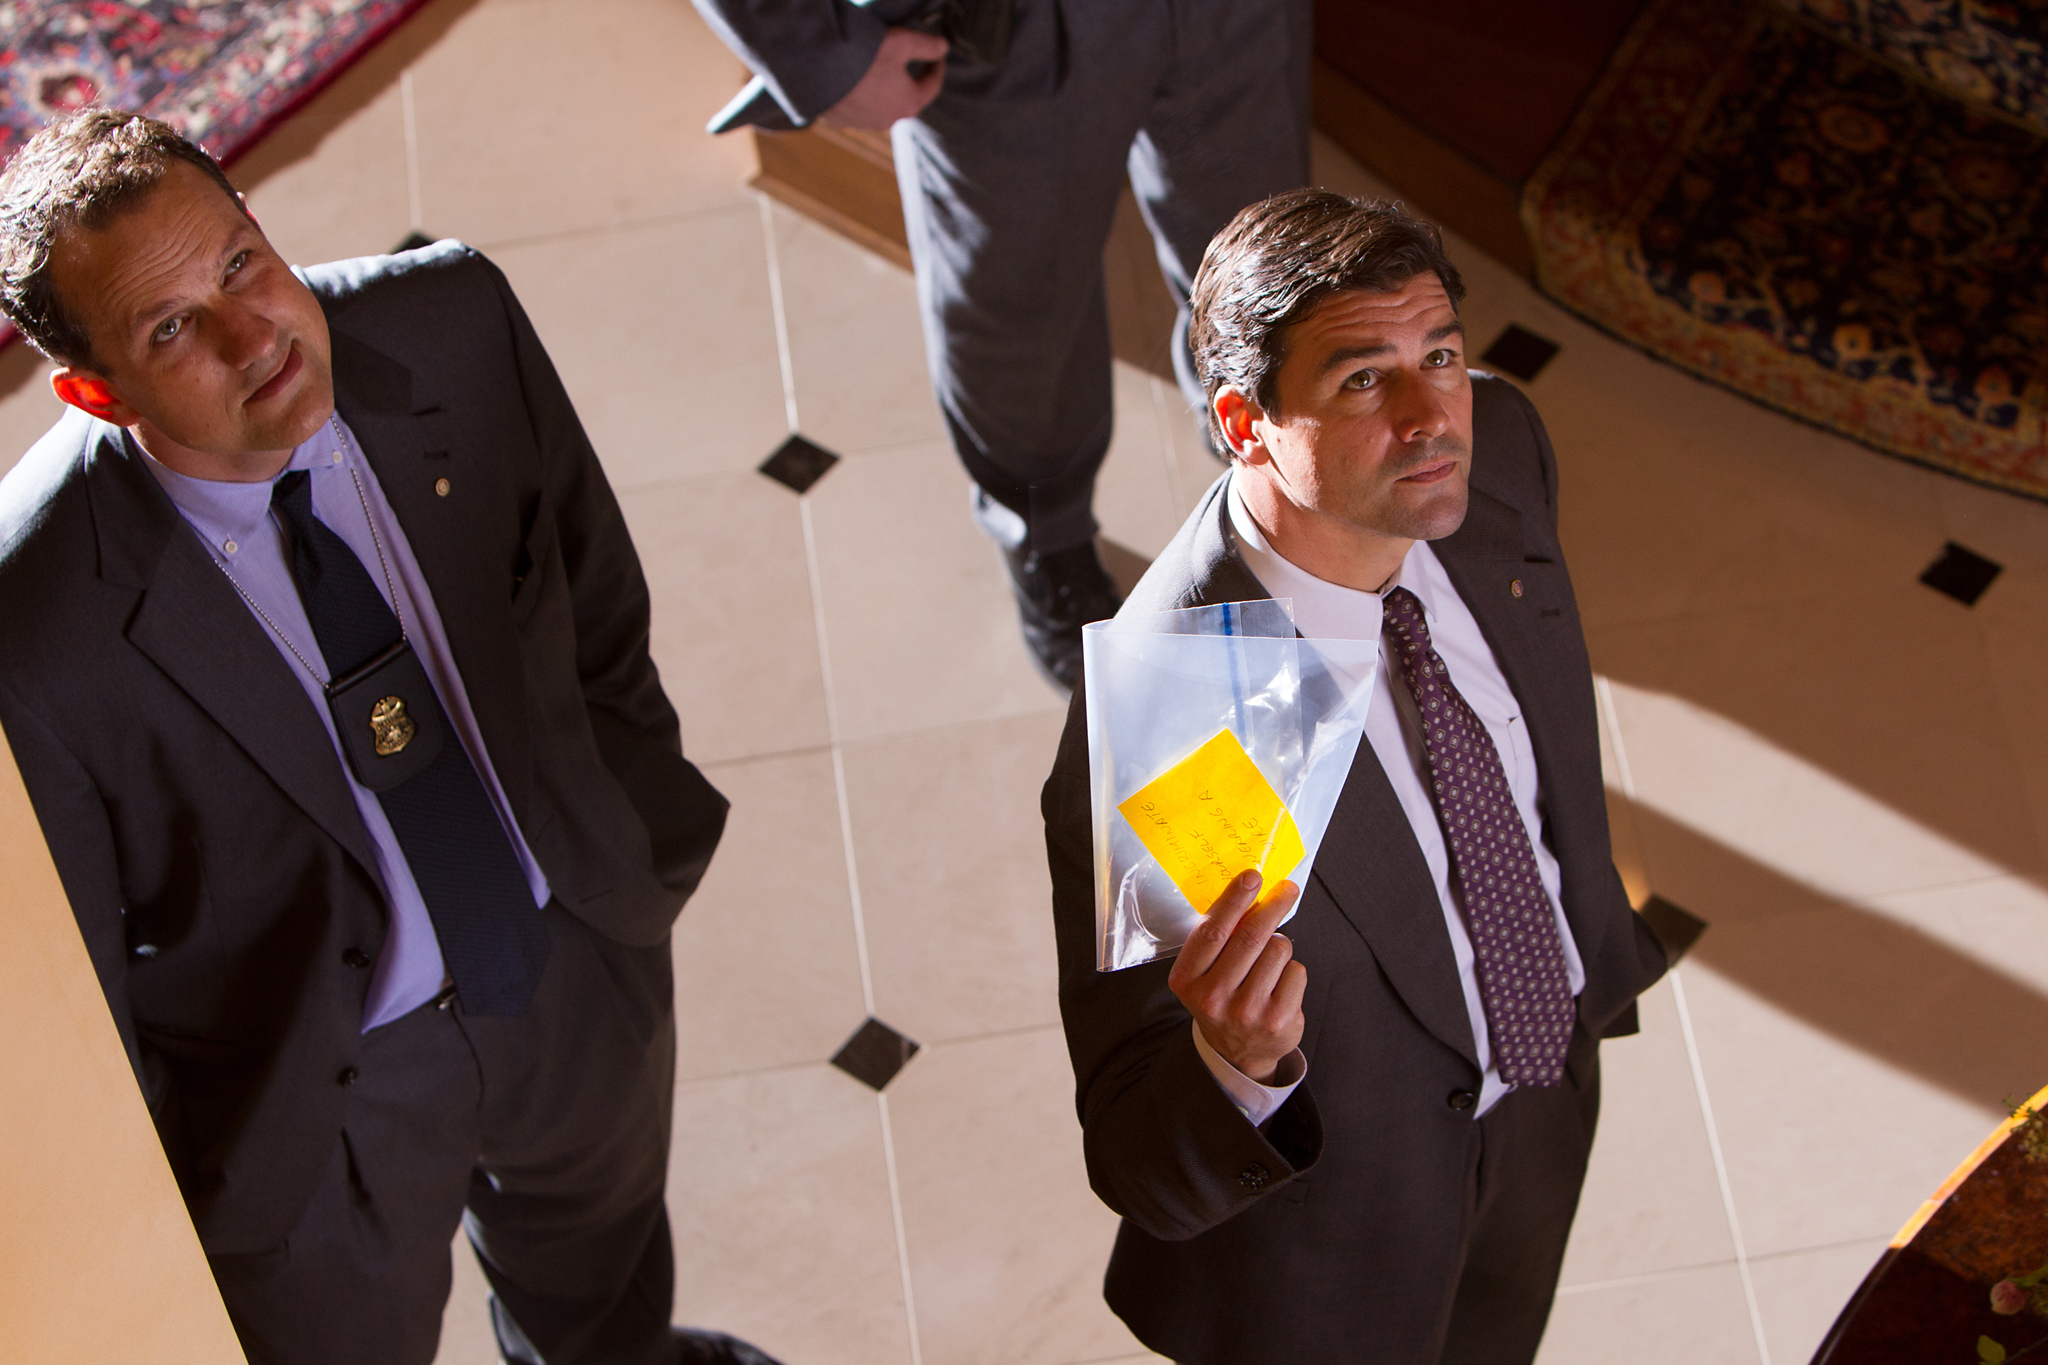 Kyle Chandler and Ted Griffin in The Wolf of Wall Street (2013)